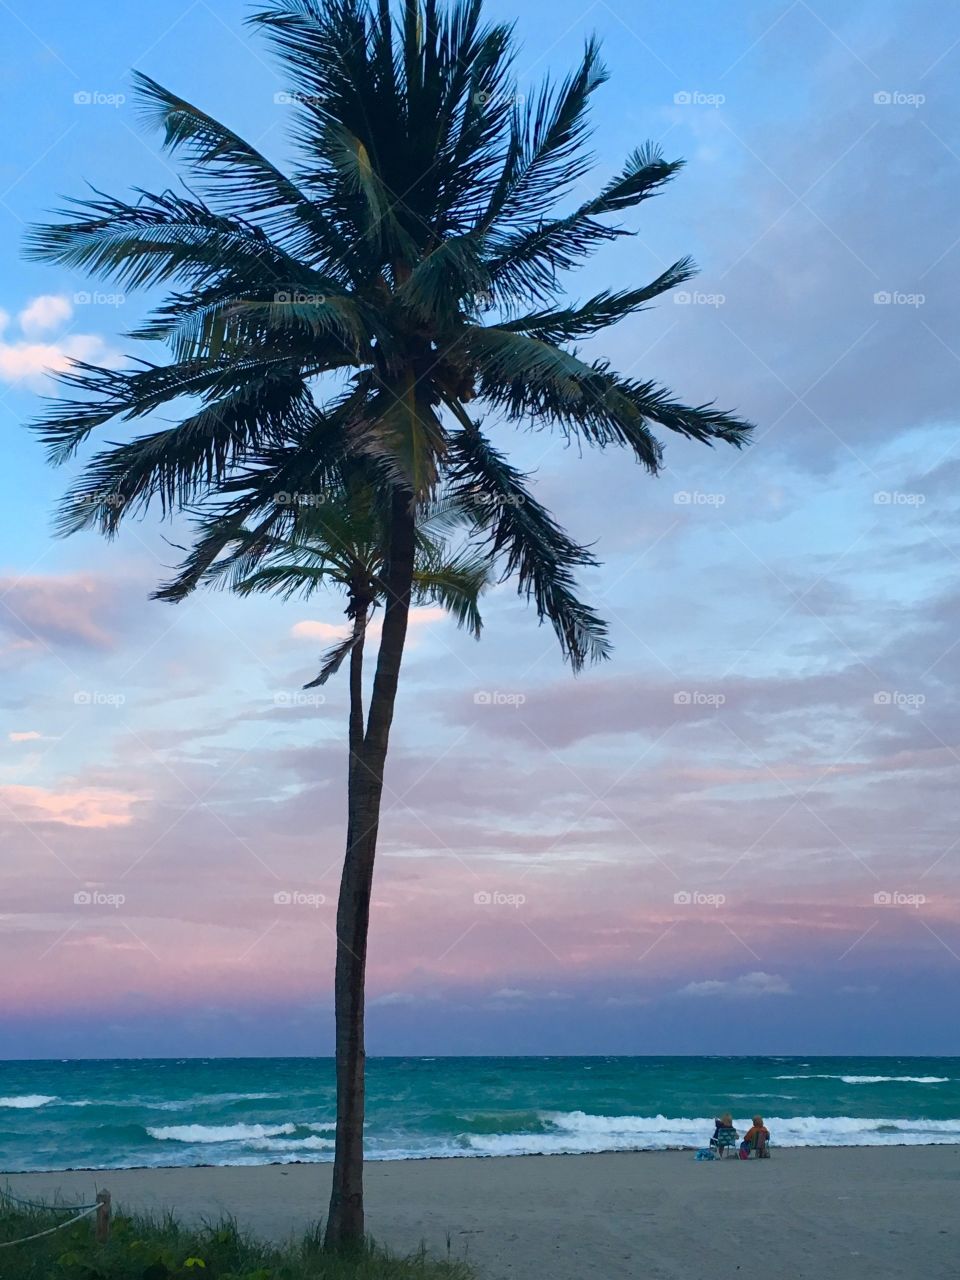 Sunset miami beach with palm trees